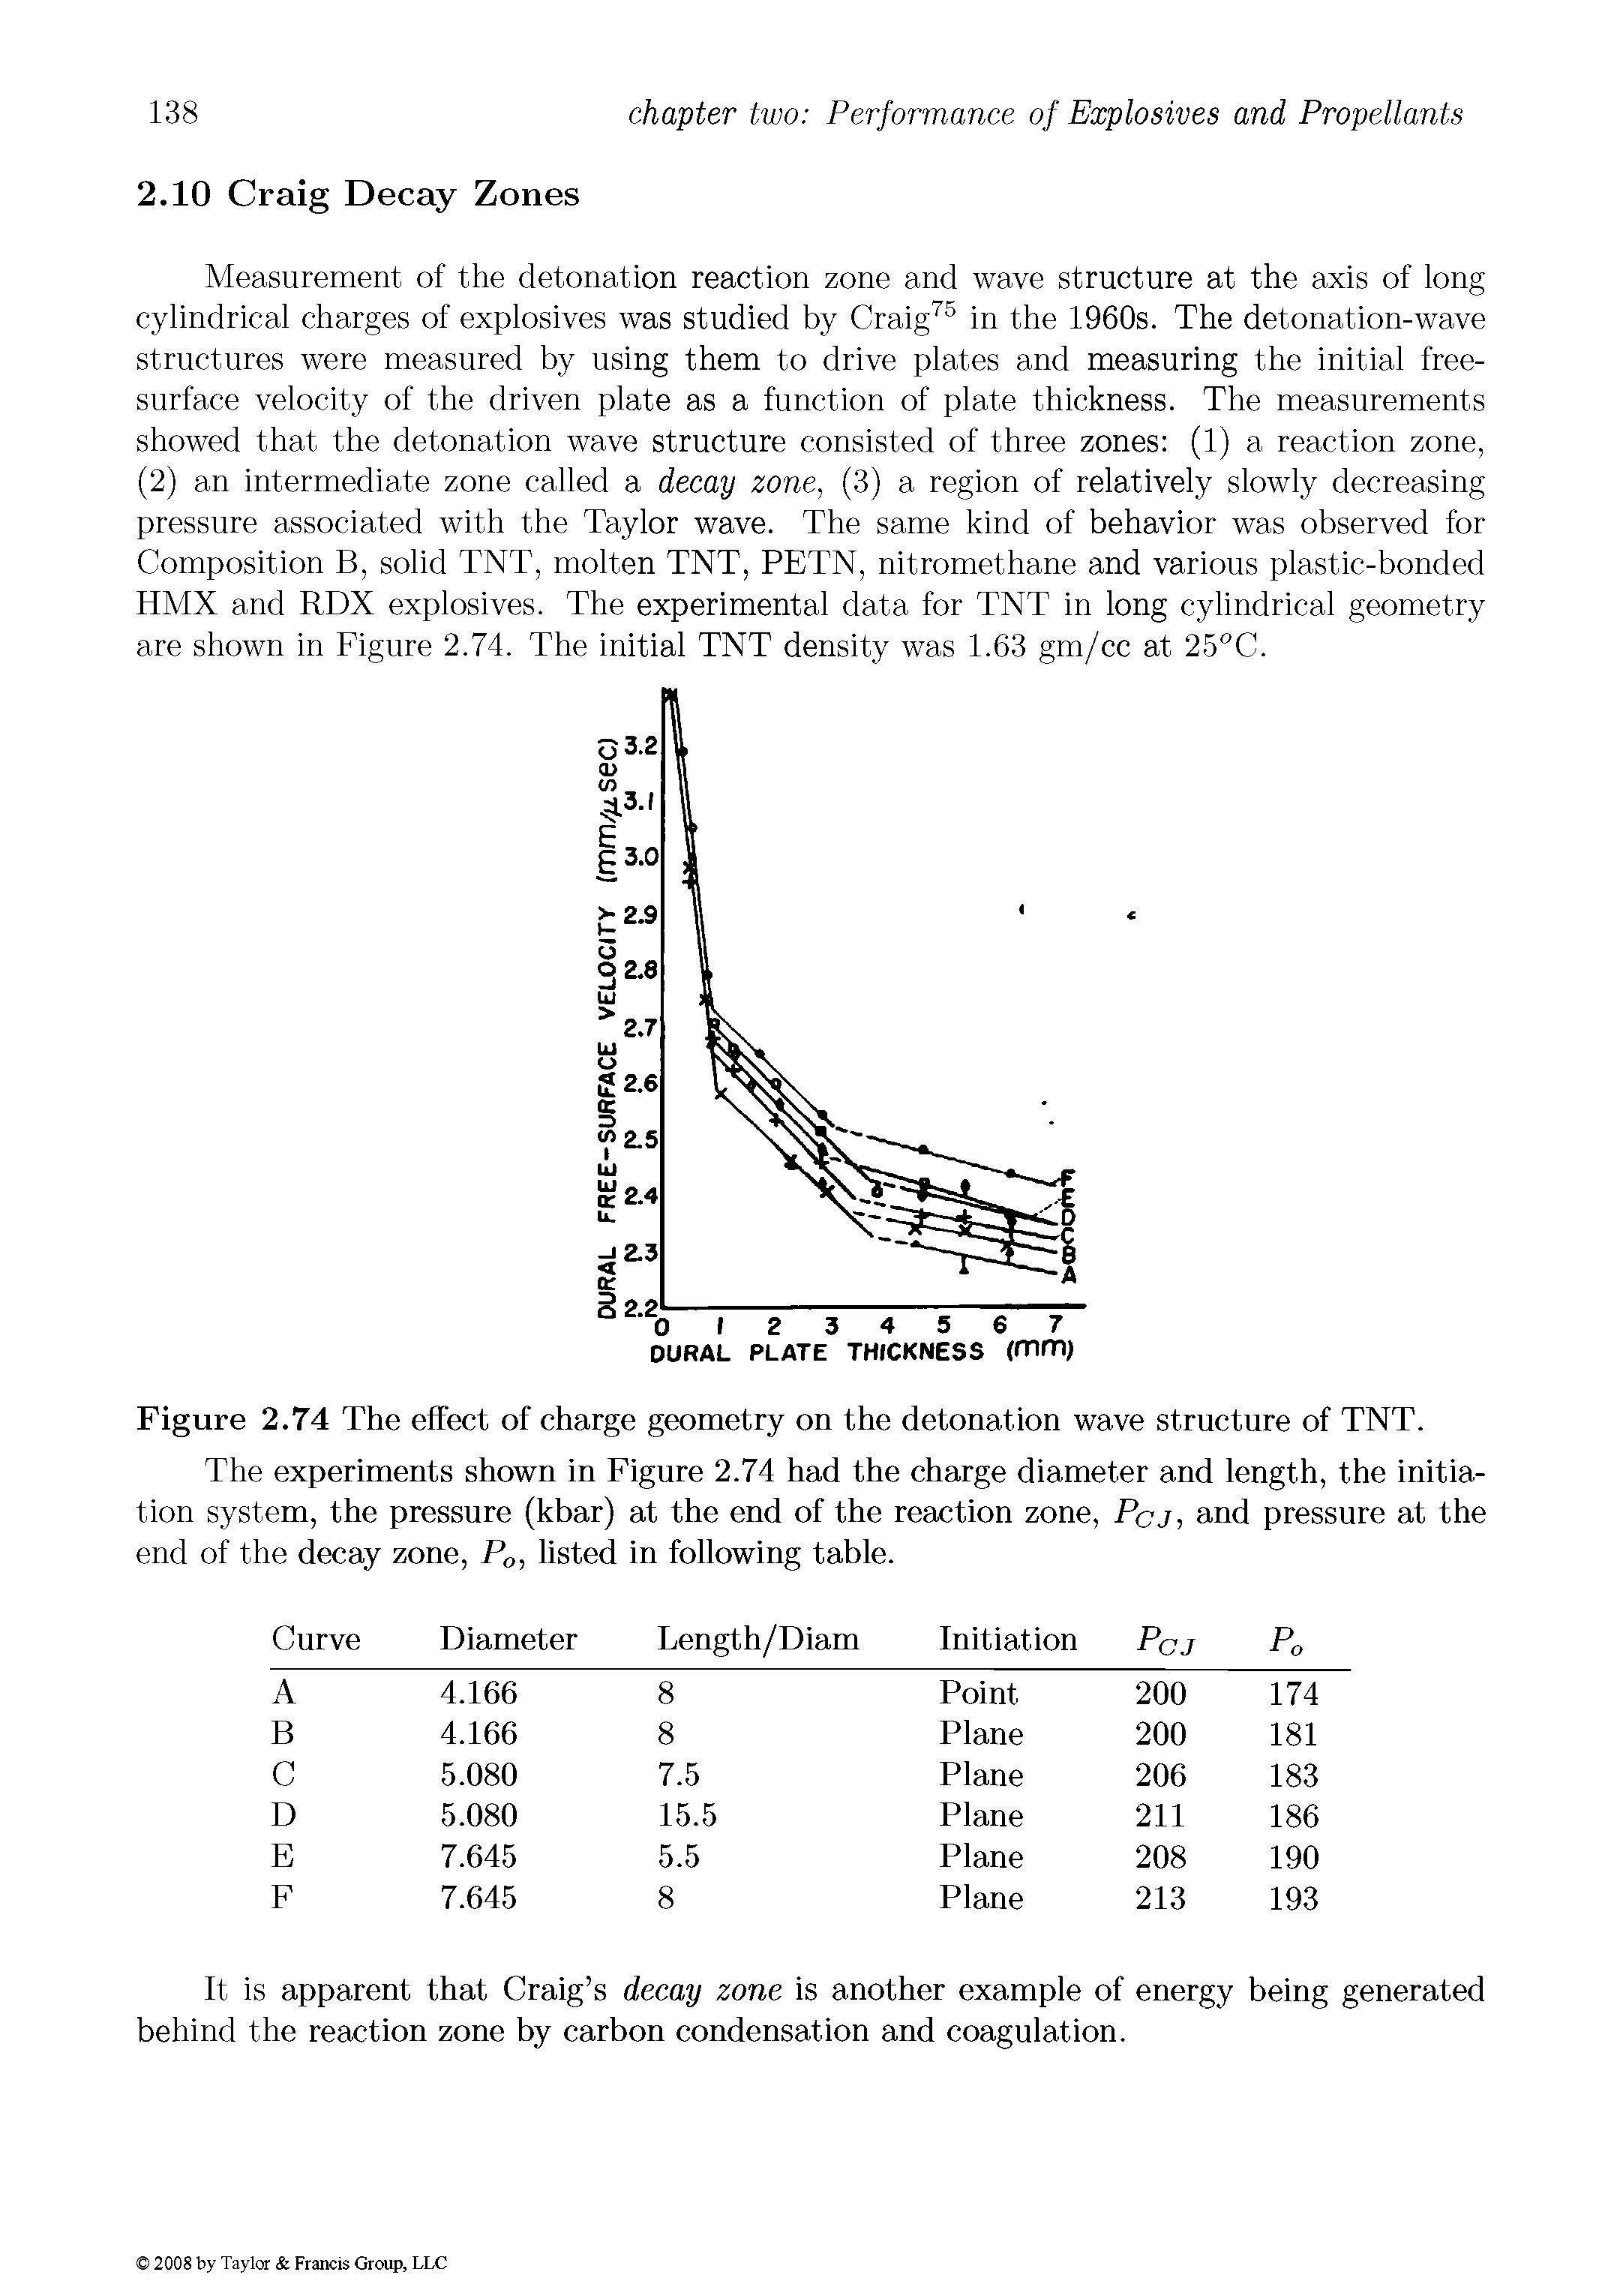 Figure 2.74 The effect of charge geometry on the detonation wave structure of TNT.